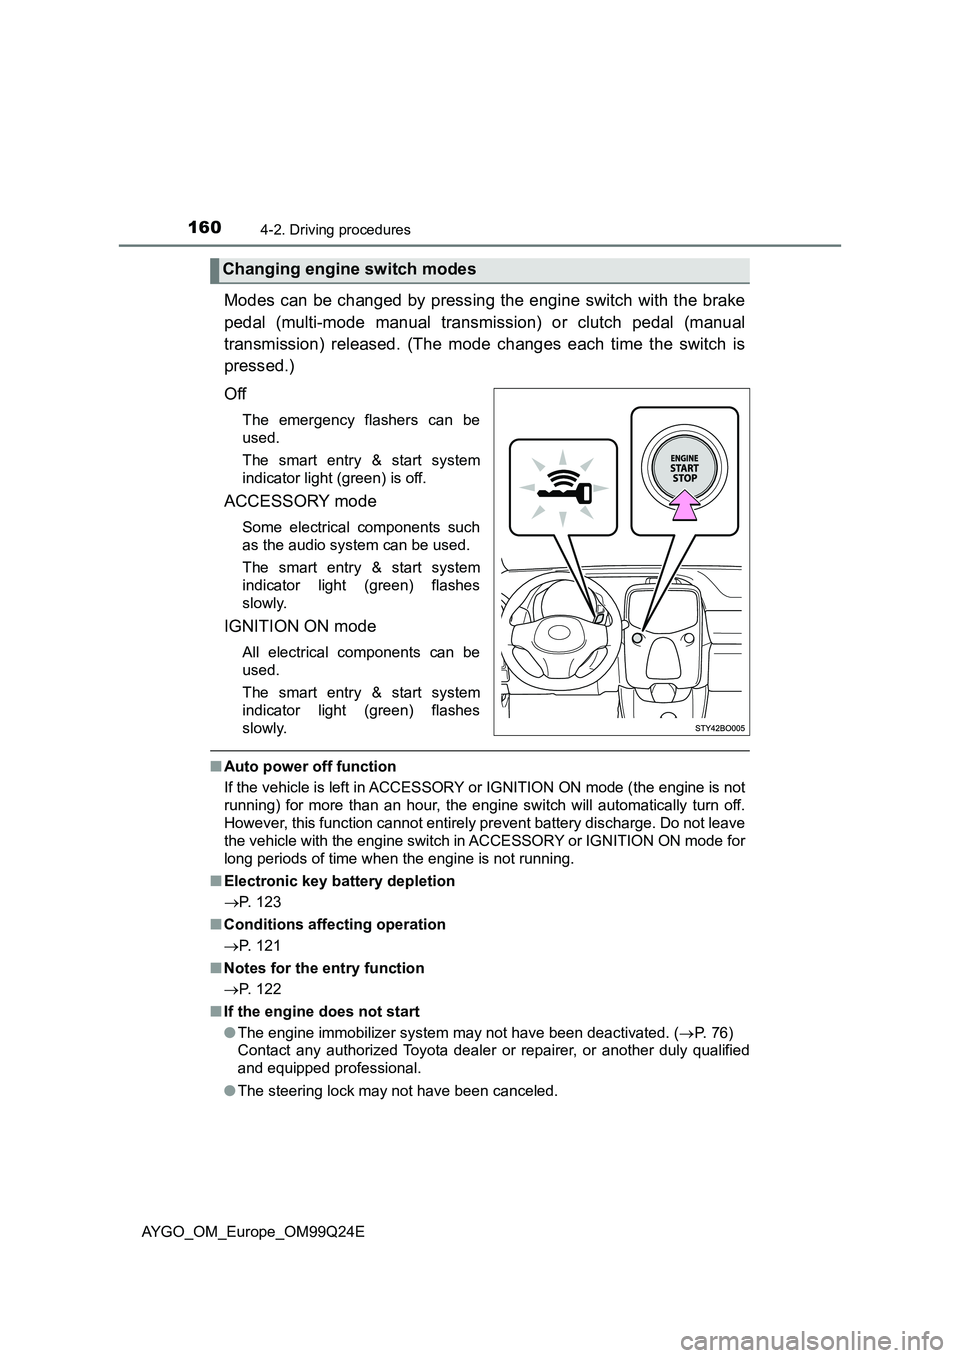 TOYOTA AYGO 2017  Owners Manual (in English) 1604-2. Driving procedures
AYGO_OM_Europe_OM99Q24E
Modes can be changed by pressing the engine switch with the brake 
pedal (multi-mode manual transmission) or clutch pedal (manual 
transmission) rele